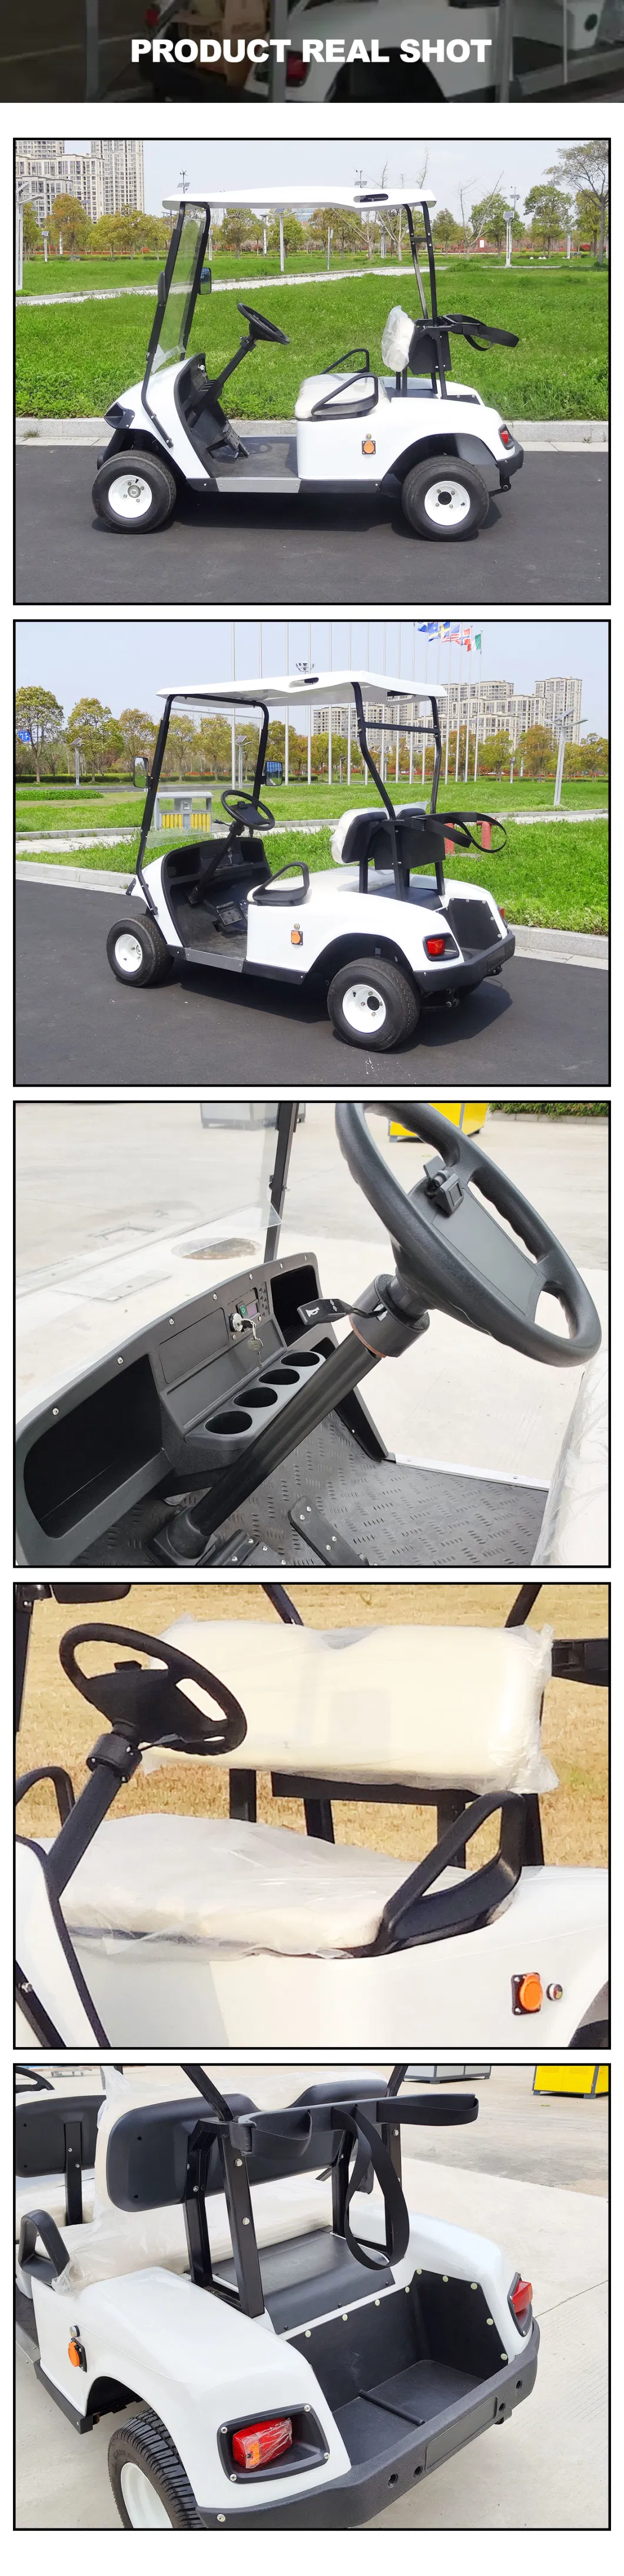 Custom Adult Elite Fancy Mini 2 Seaters Electric Custom Golf Carts for Sale with Lithium Battery Powered